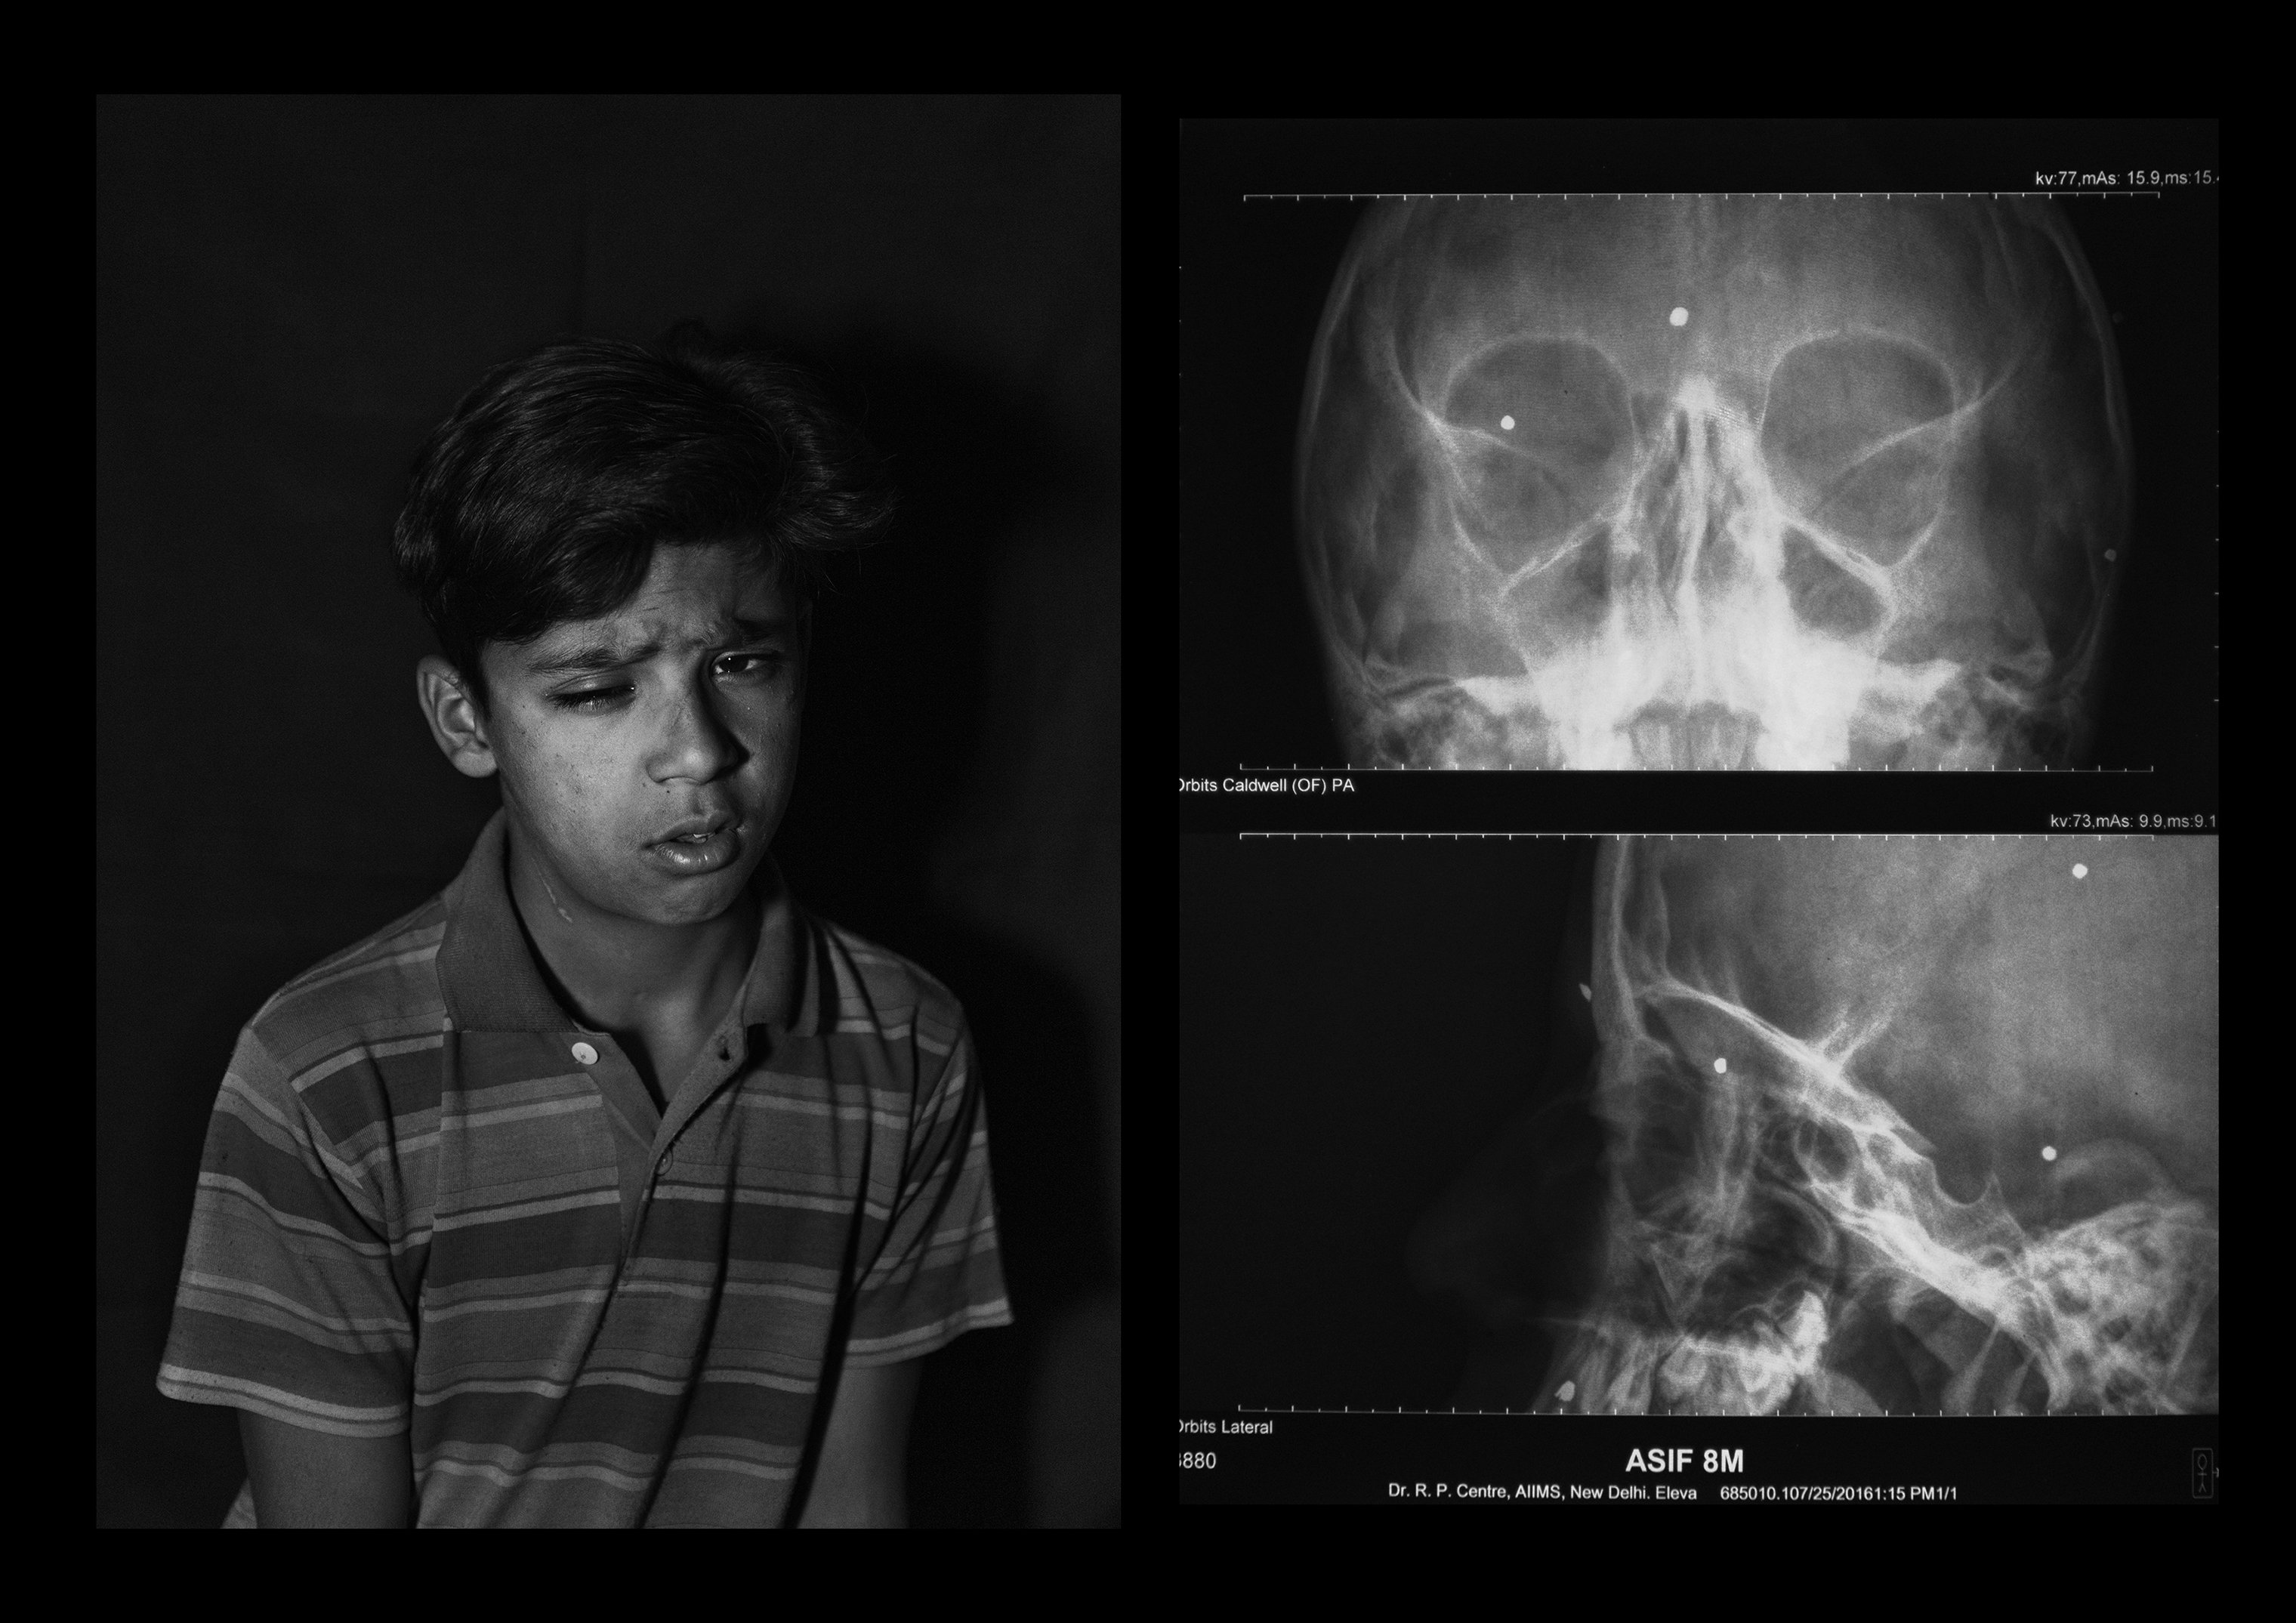 Asif Ahmad Sheikh, 10 years old, from Anantnag. Asif received one pellet in his right eye, losing vision entirely on that side. He told Pasquarelli the injury has caused lots of problems at school. (Camillo Pasquarelli)